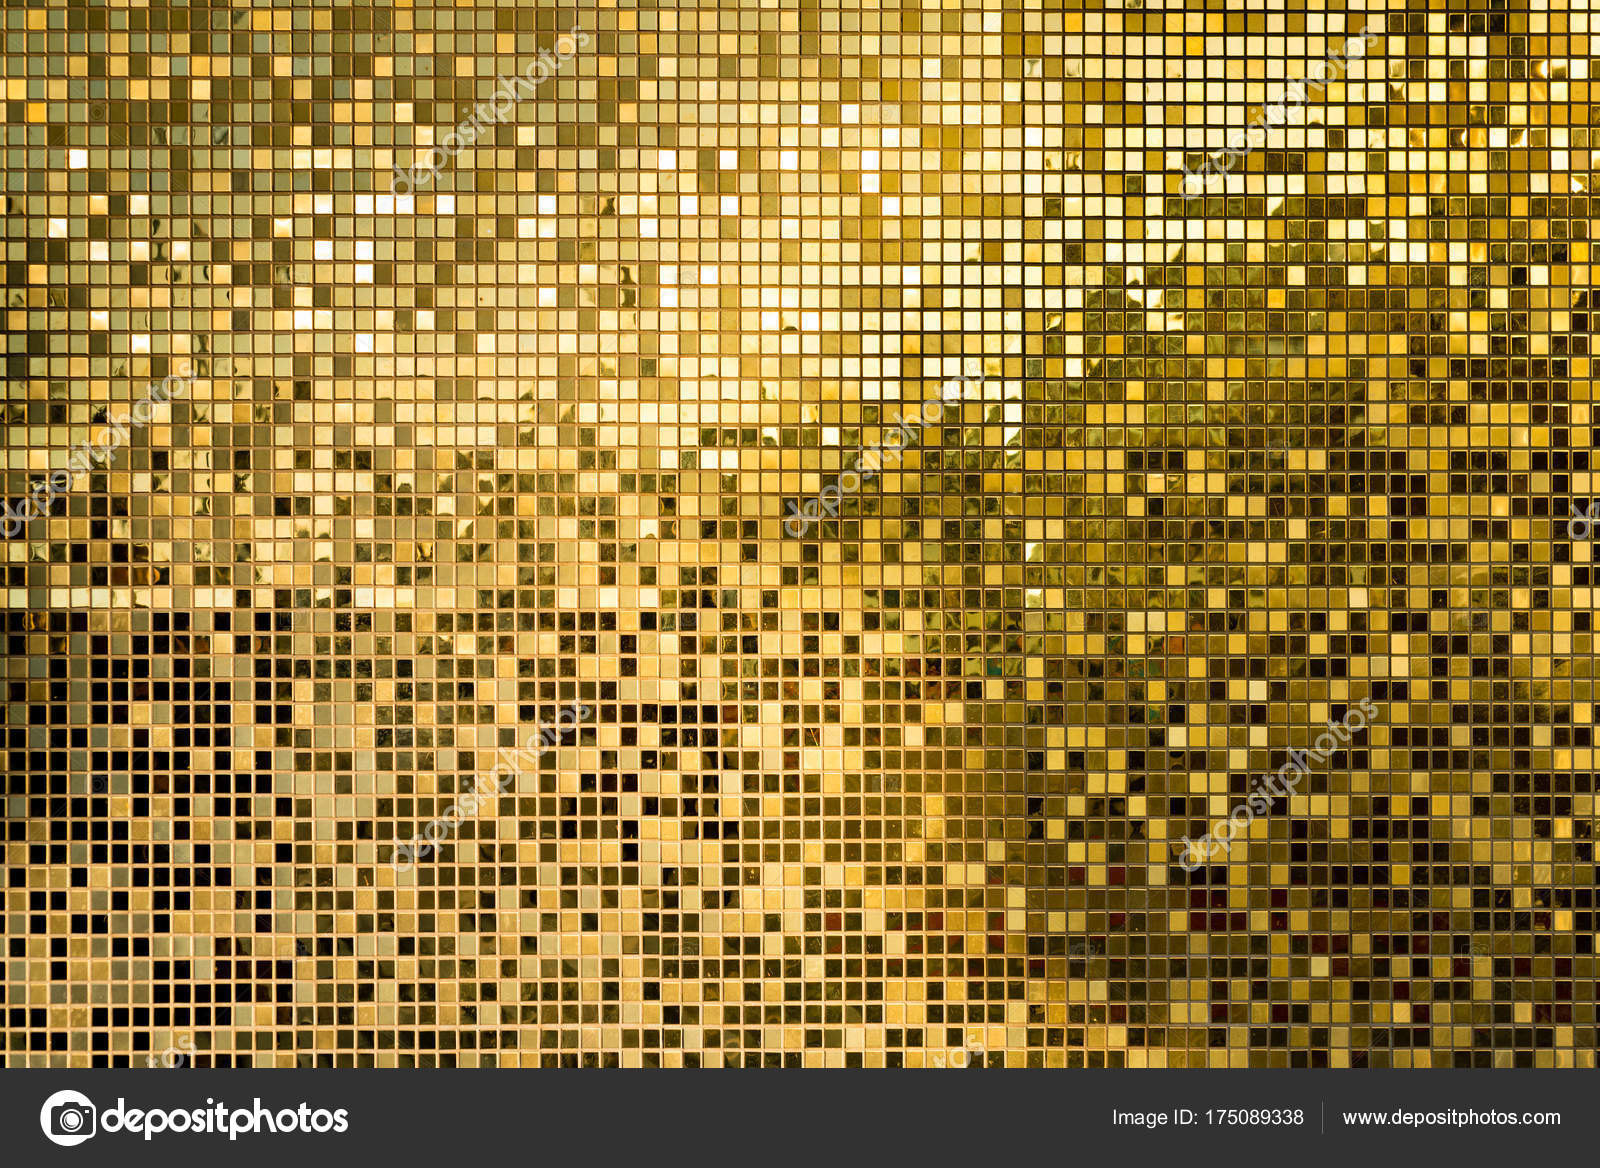 Gold Square Mosaic Tiles For Texture, Gold Mosaic Tile